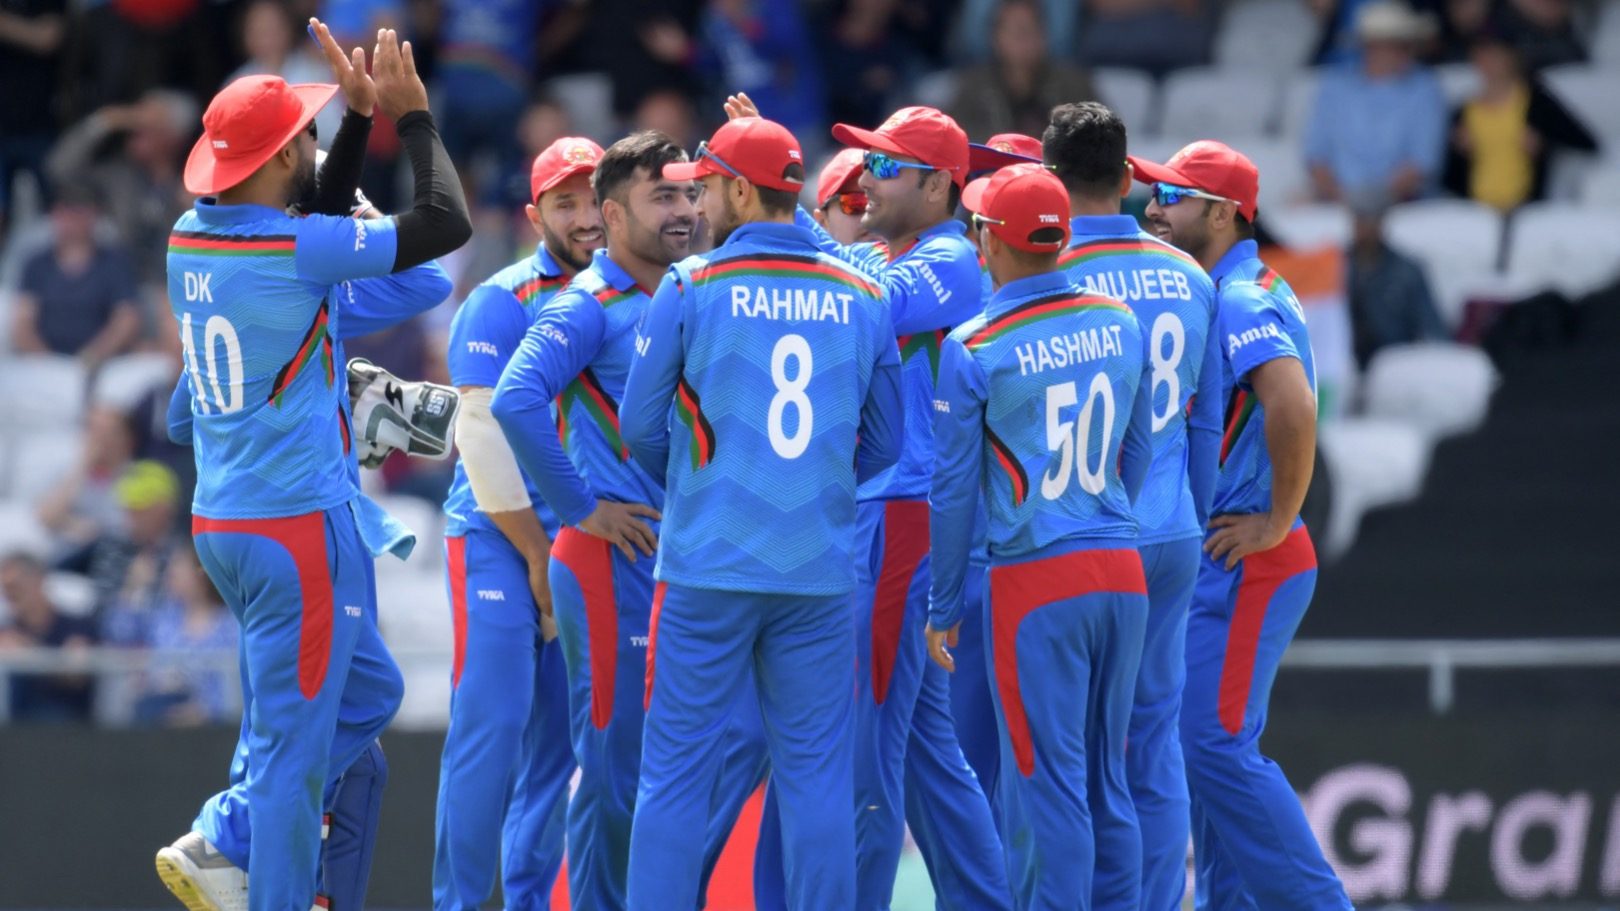 Taliban takeover: What next for the Afghanistan cricket team?